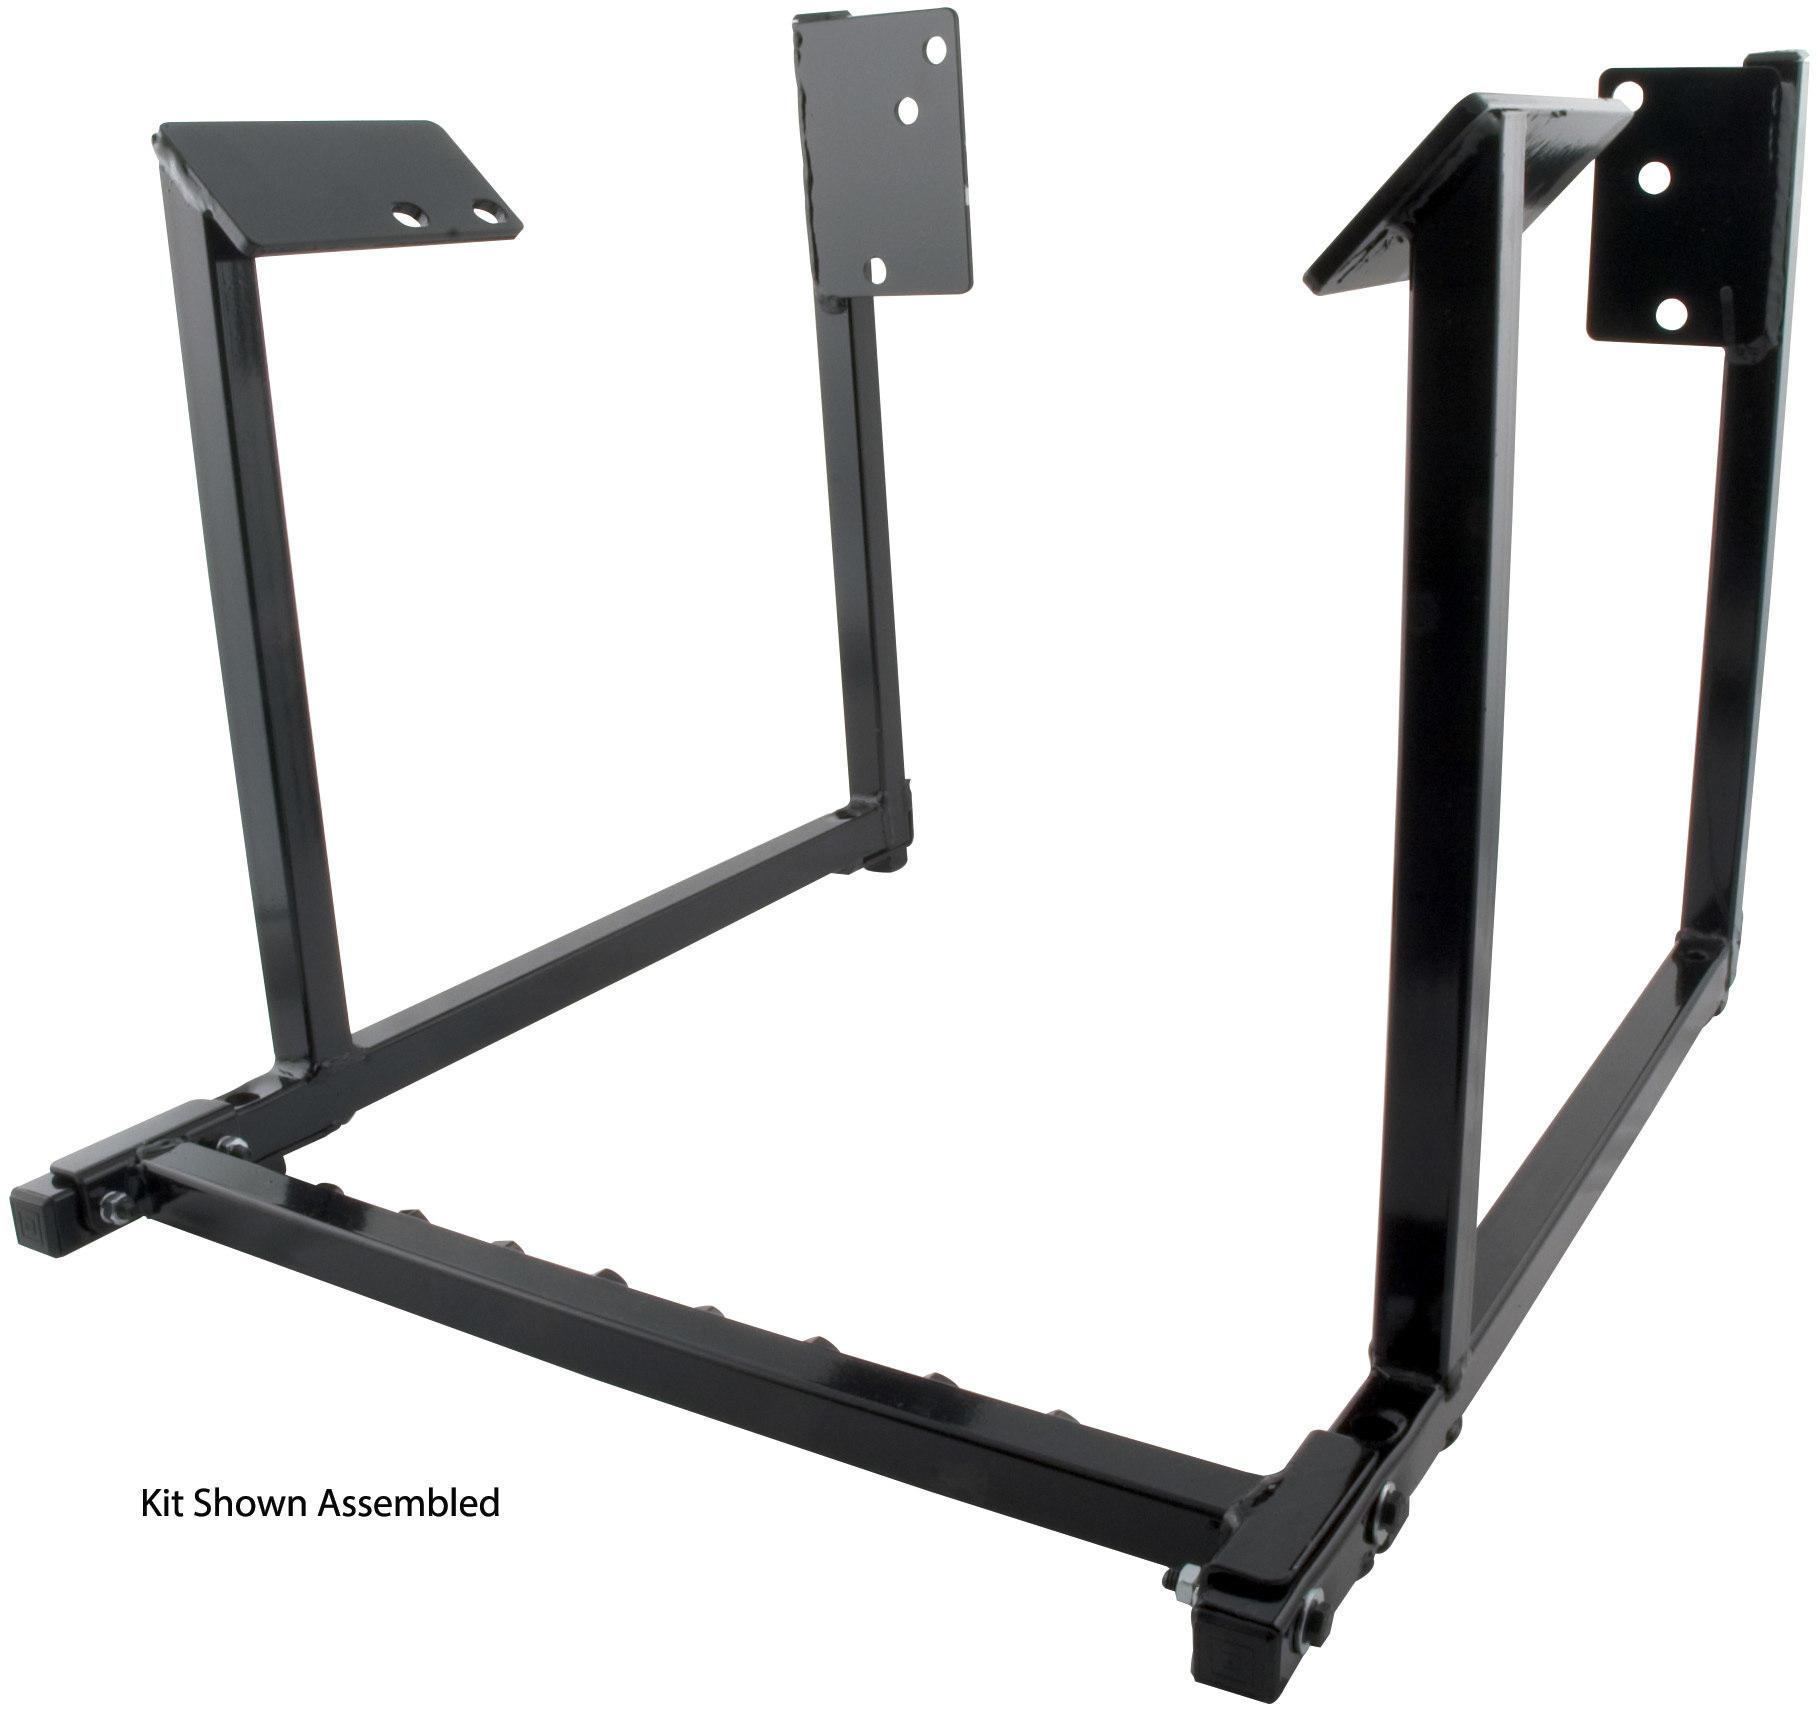 Allstar Performance 10154 Engine Cradle, Heavy Duty, 1 in Square Tube, Hardware Included, Steel, Black Powder Coat, Big Block Ford, Each